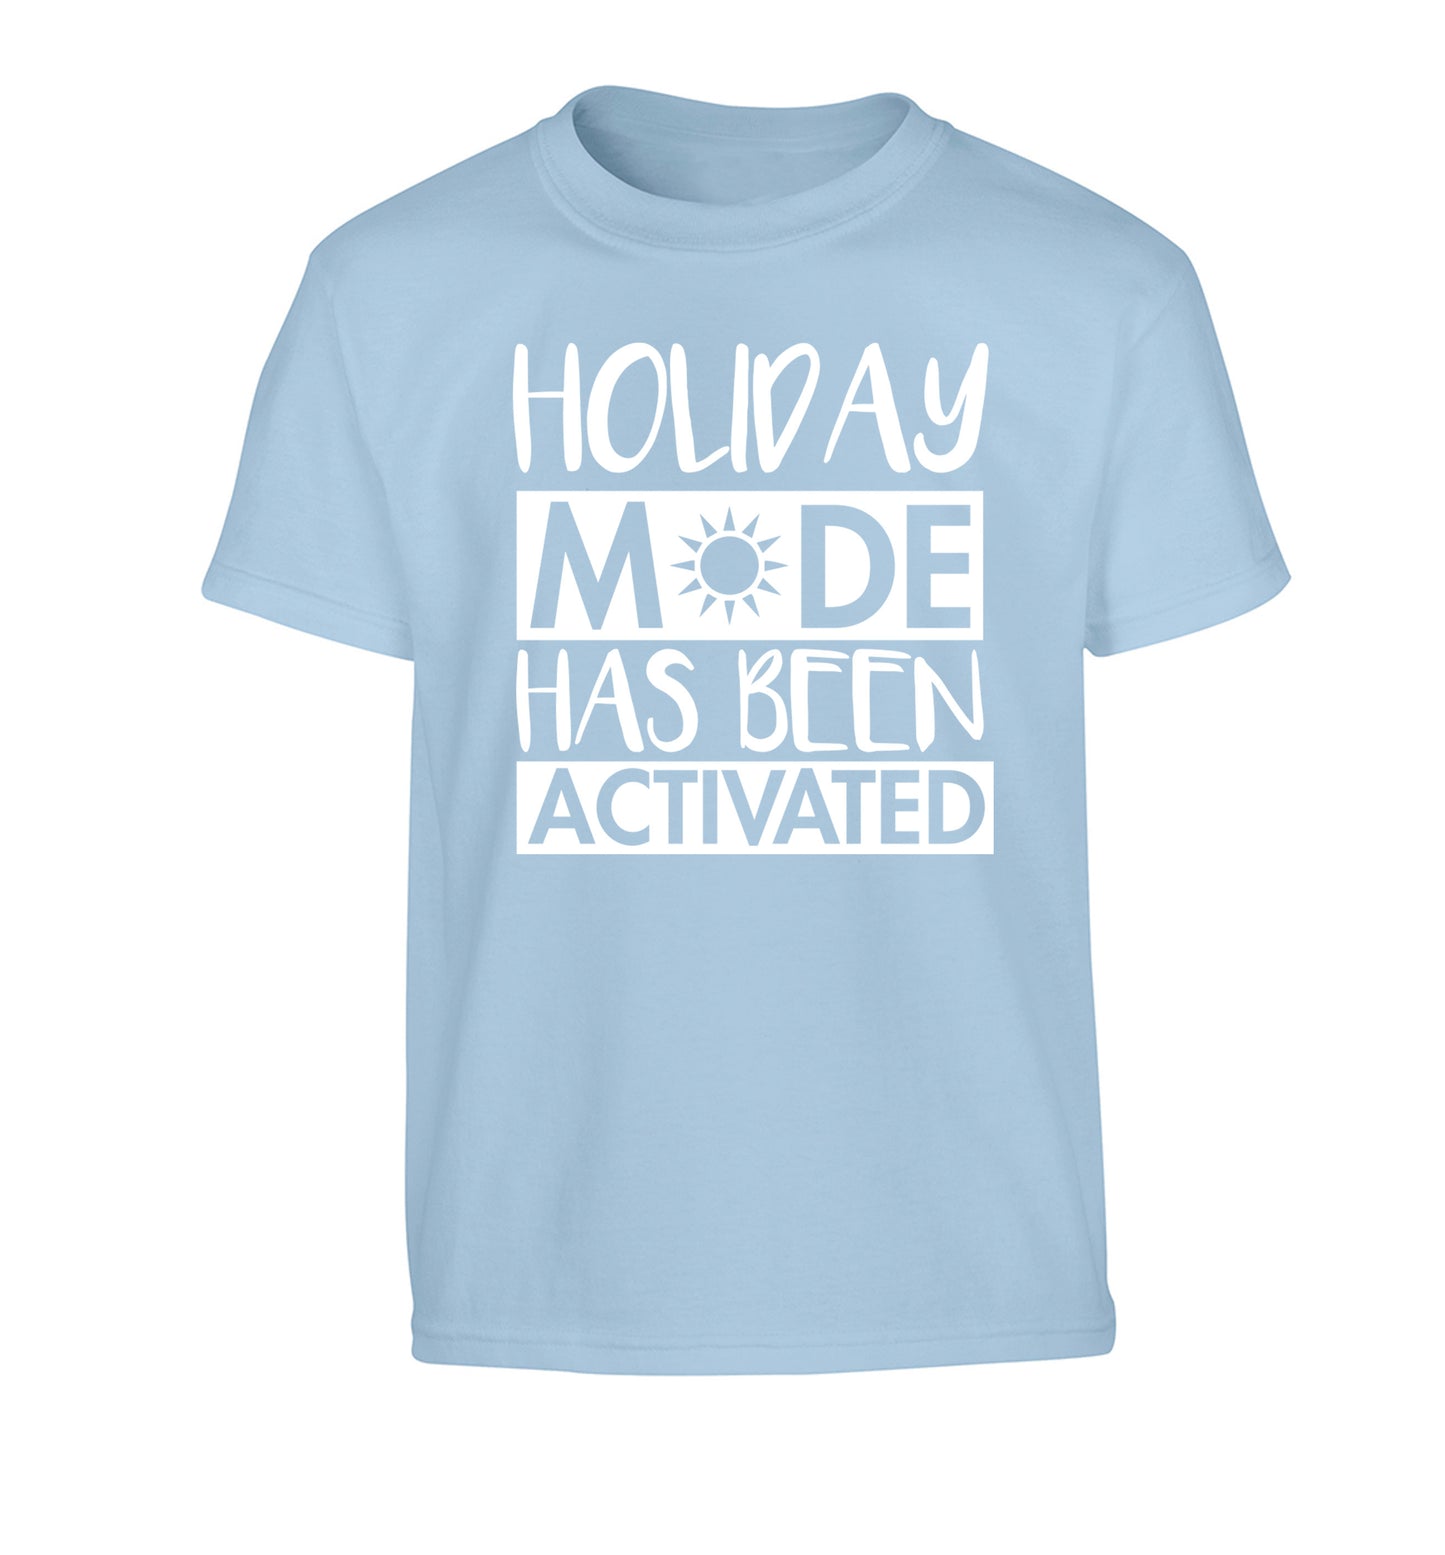 Holiday mode has been activated Children's light blue Tshirt 12-14 Years